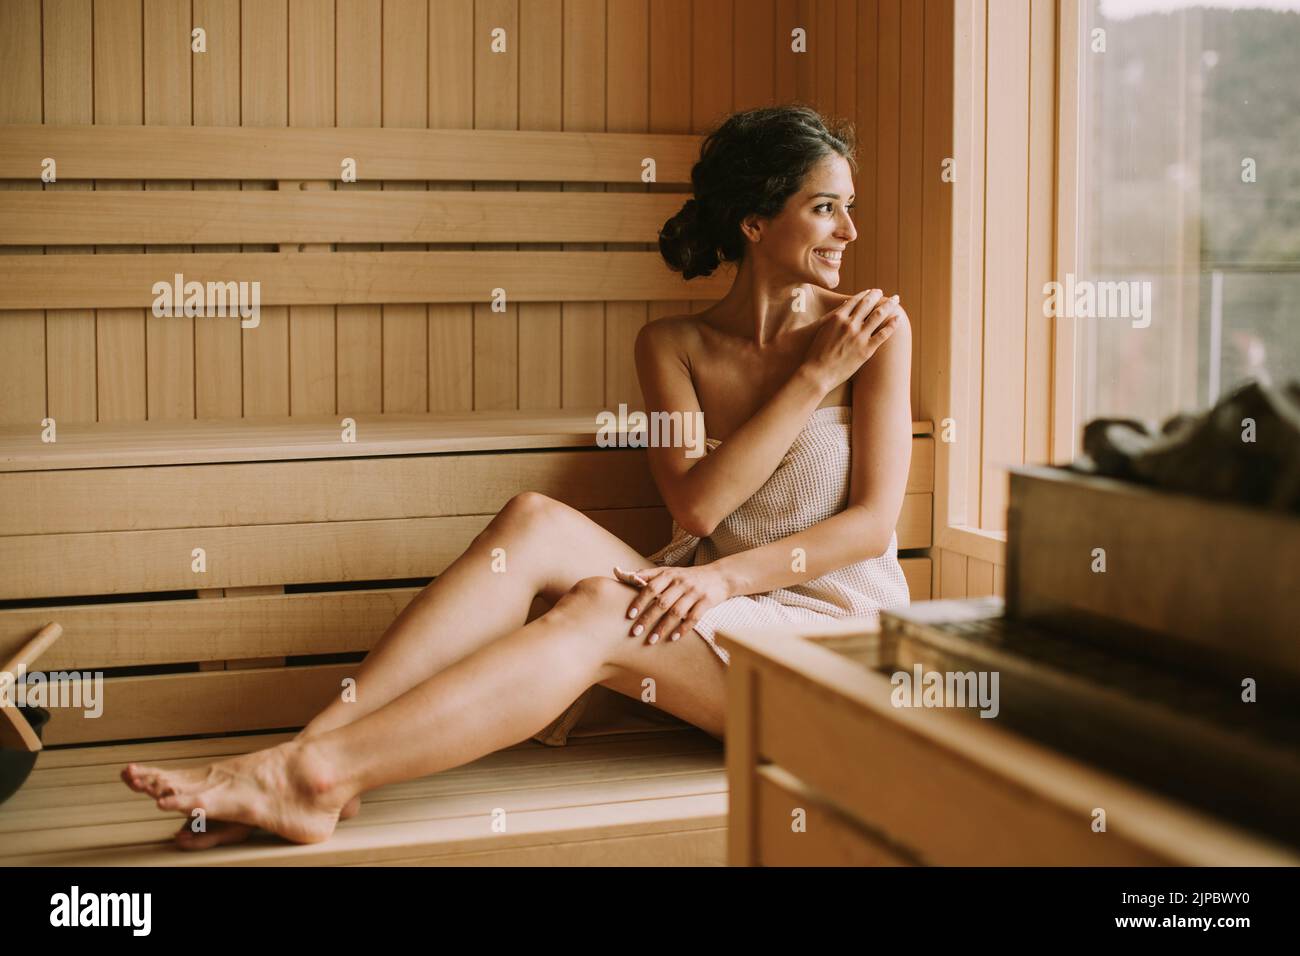 Attractive young woman relaxing in the sauna Stock Photo